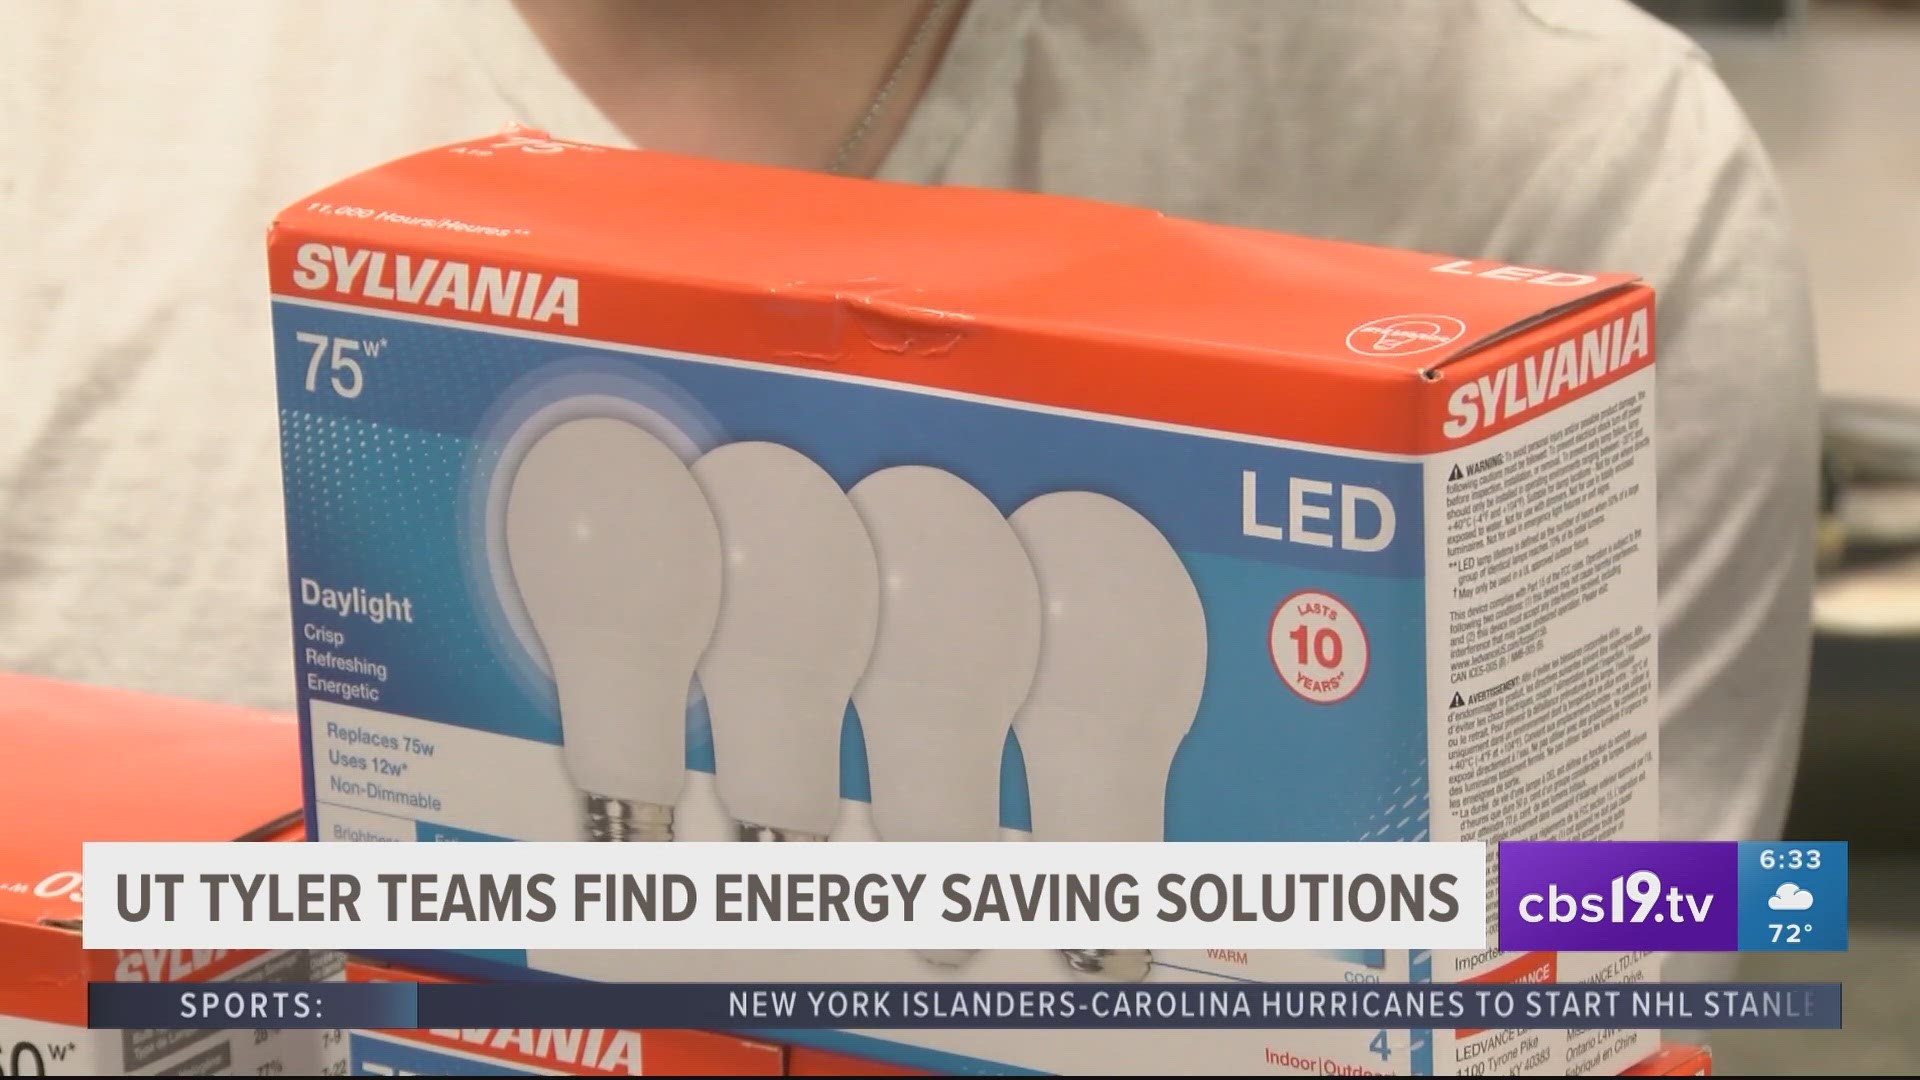 UT Tyler teams find energy saving solutions as part of U.S. Department of Energy competition